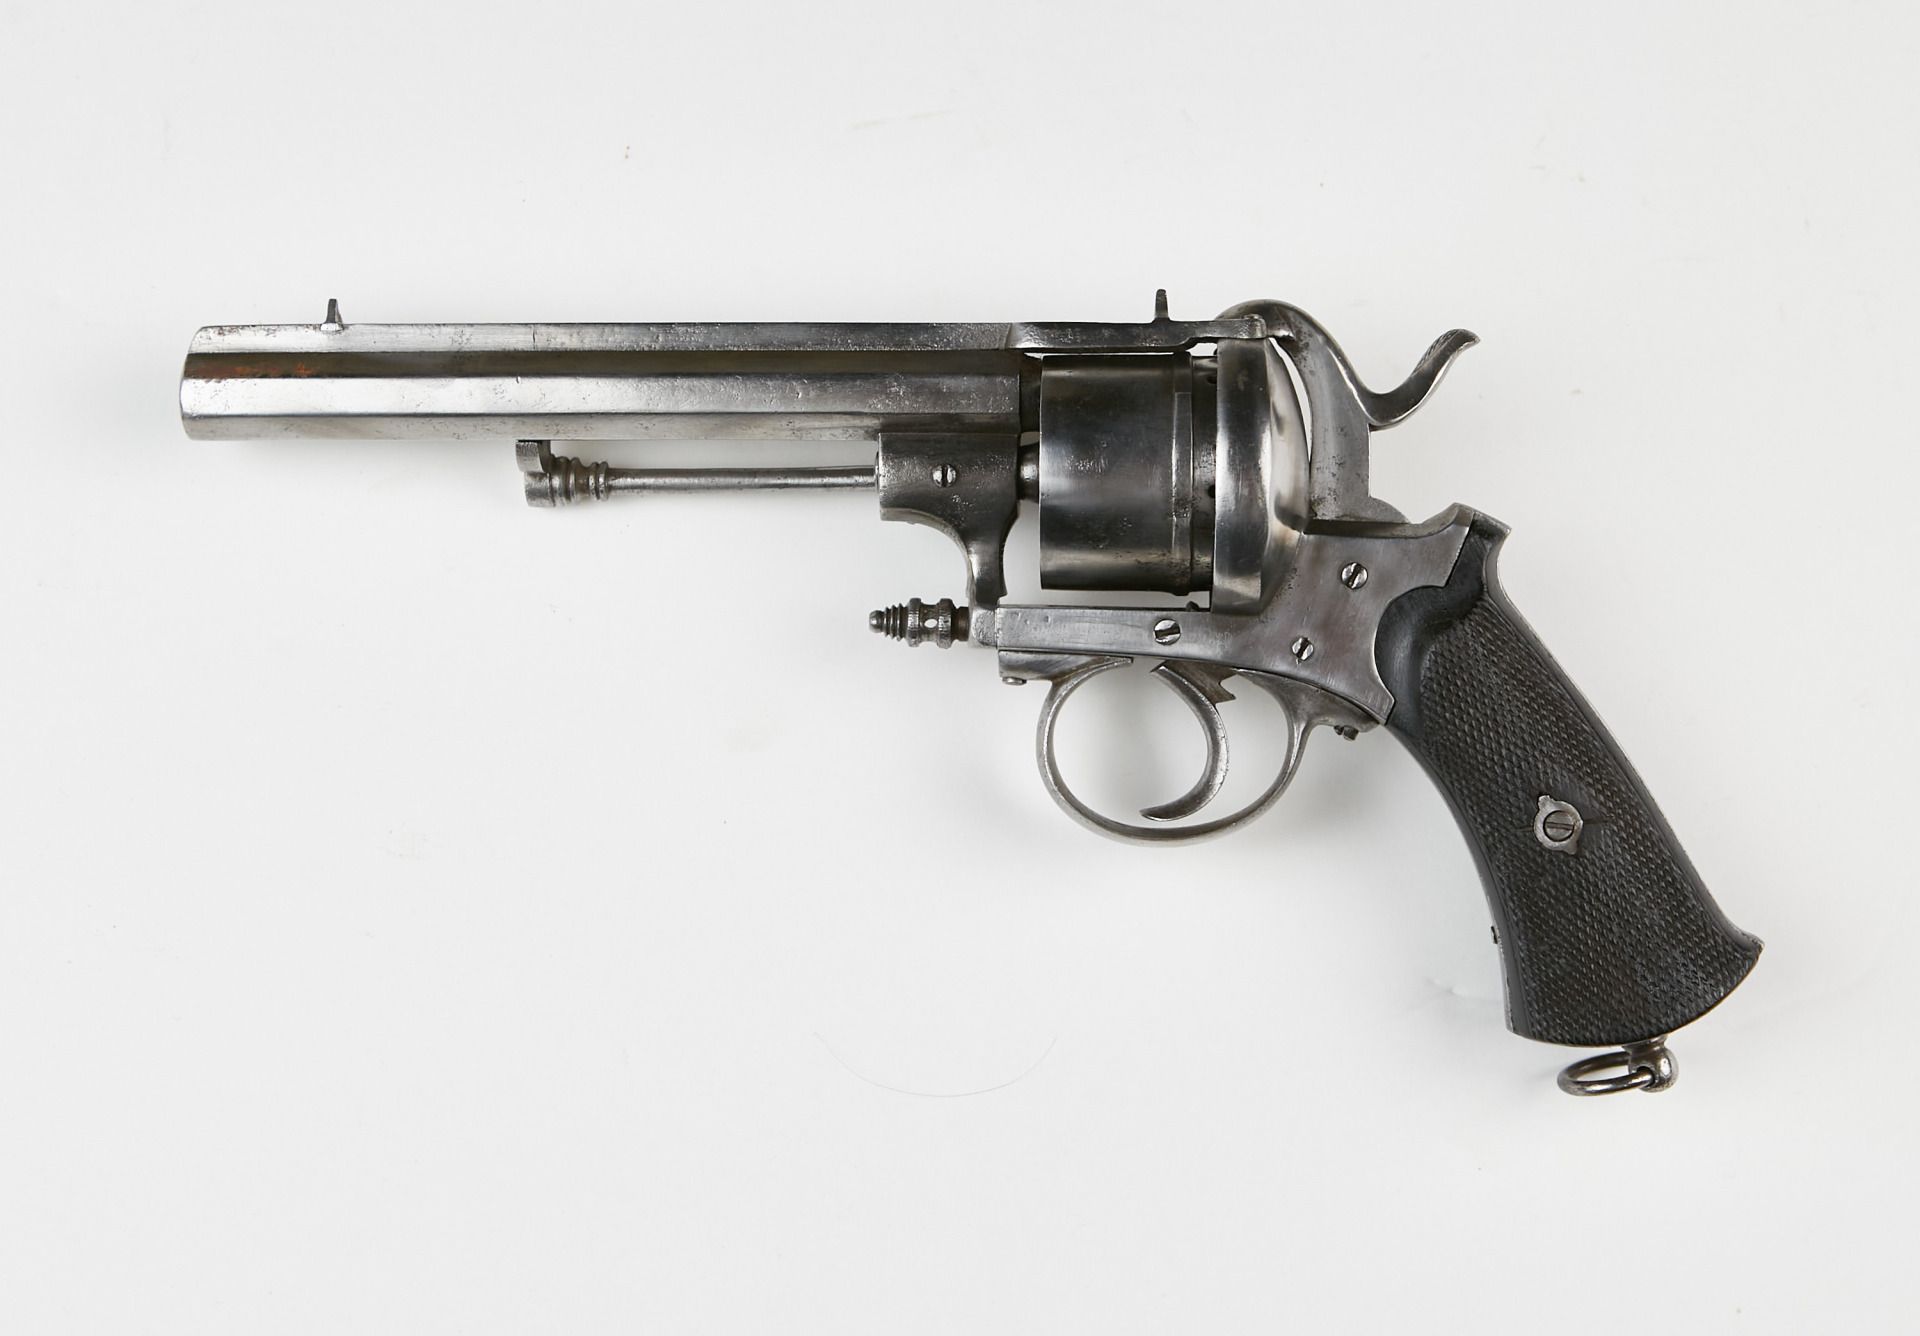 Null Pinfire revolver, six-shot, 12 mm caliber, double action.
Ribbed barrel wit&hellip;